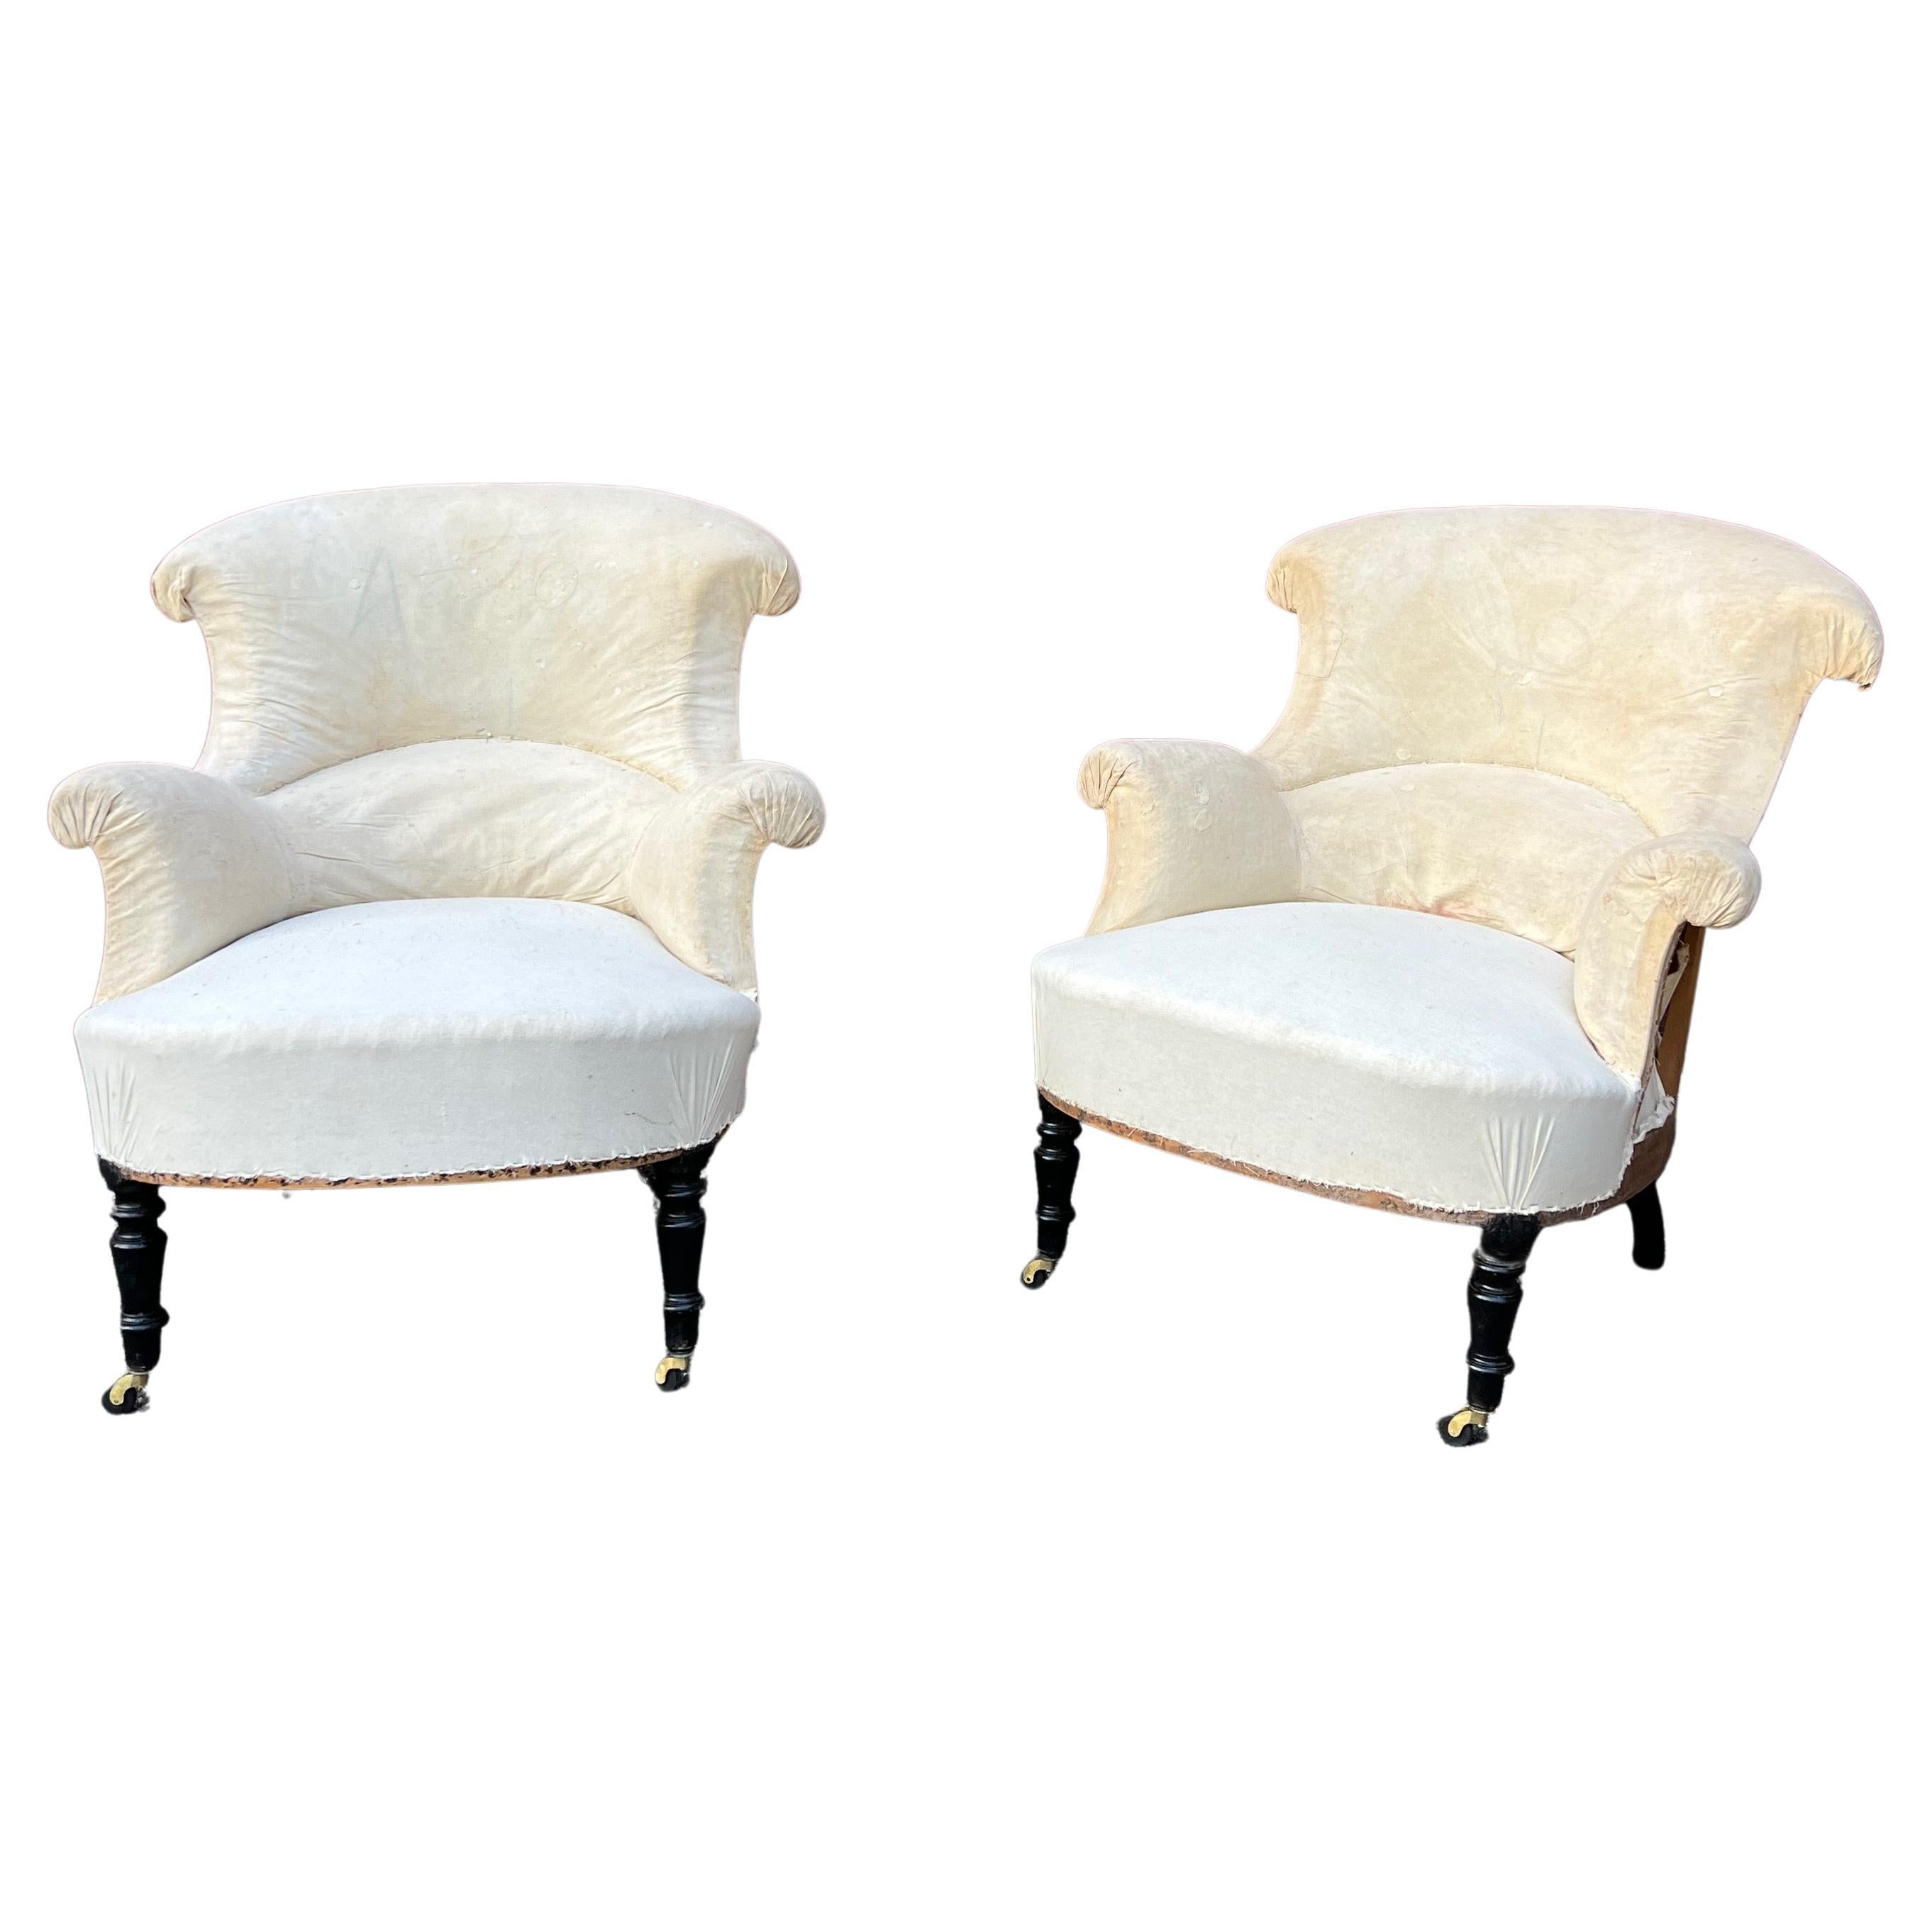 Pair of French Napoleon III Armchairs in Muslin